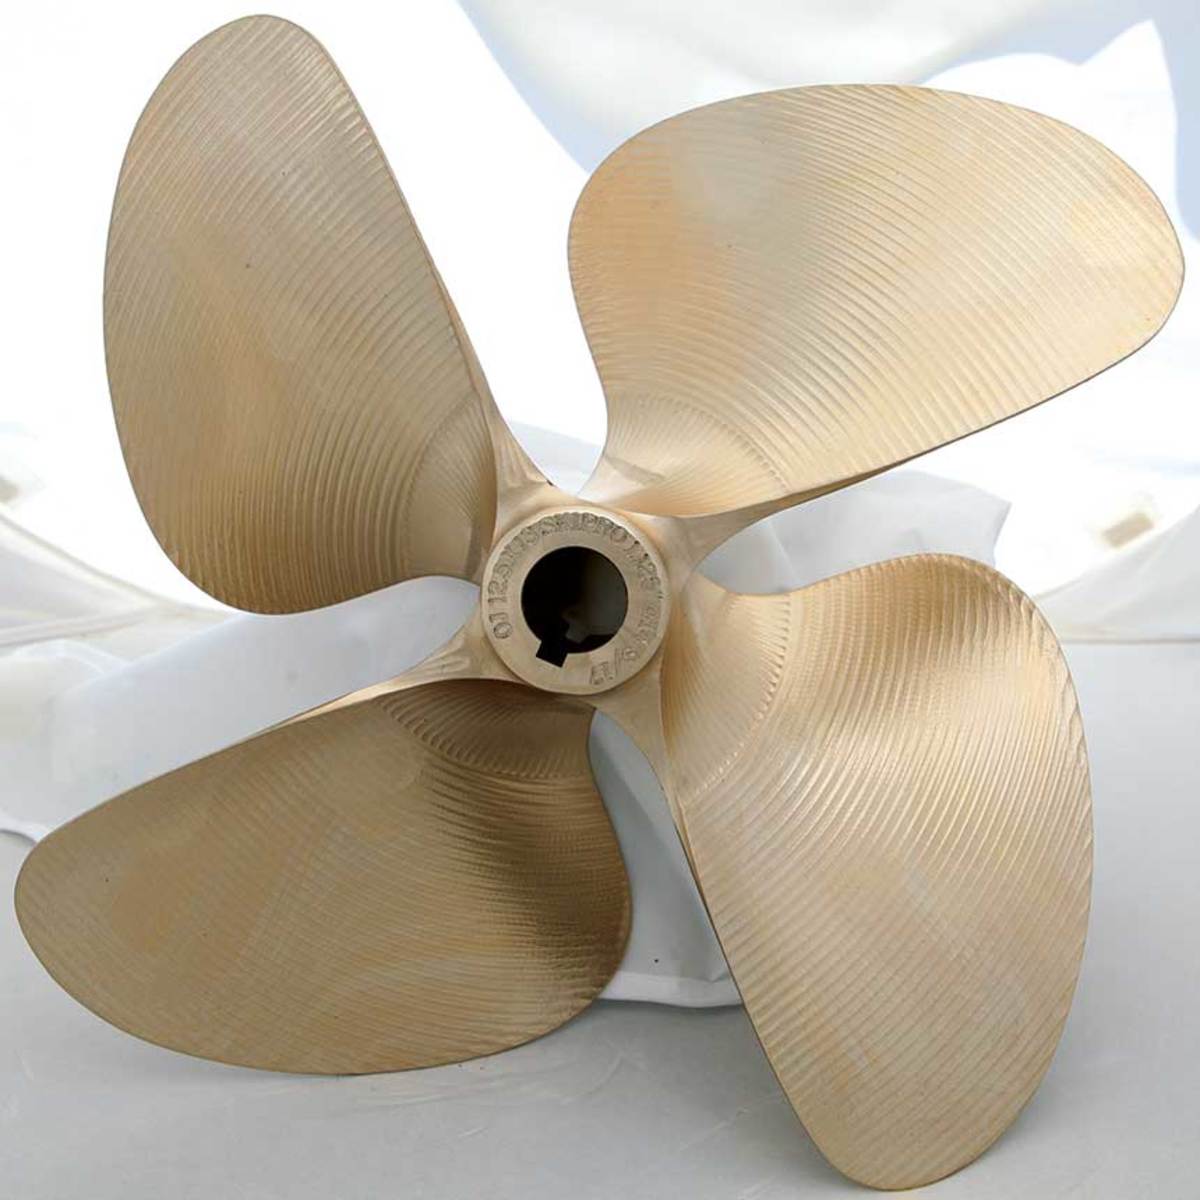 Johnson Propellers’ designs are growing with wakesports boats.